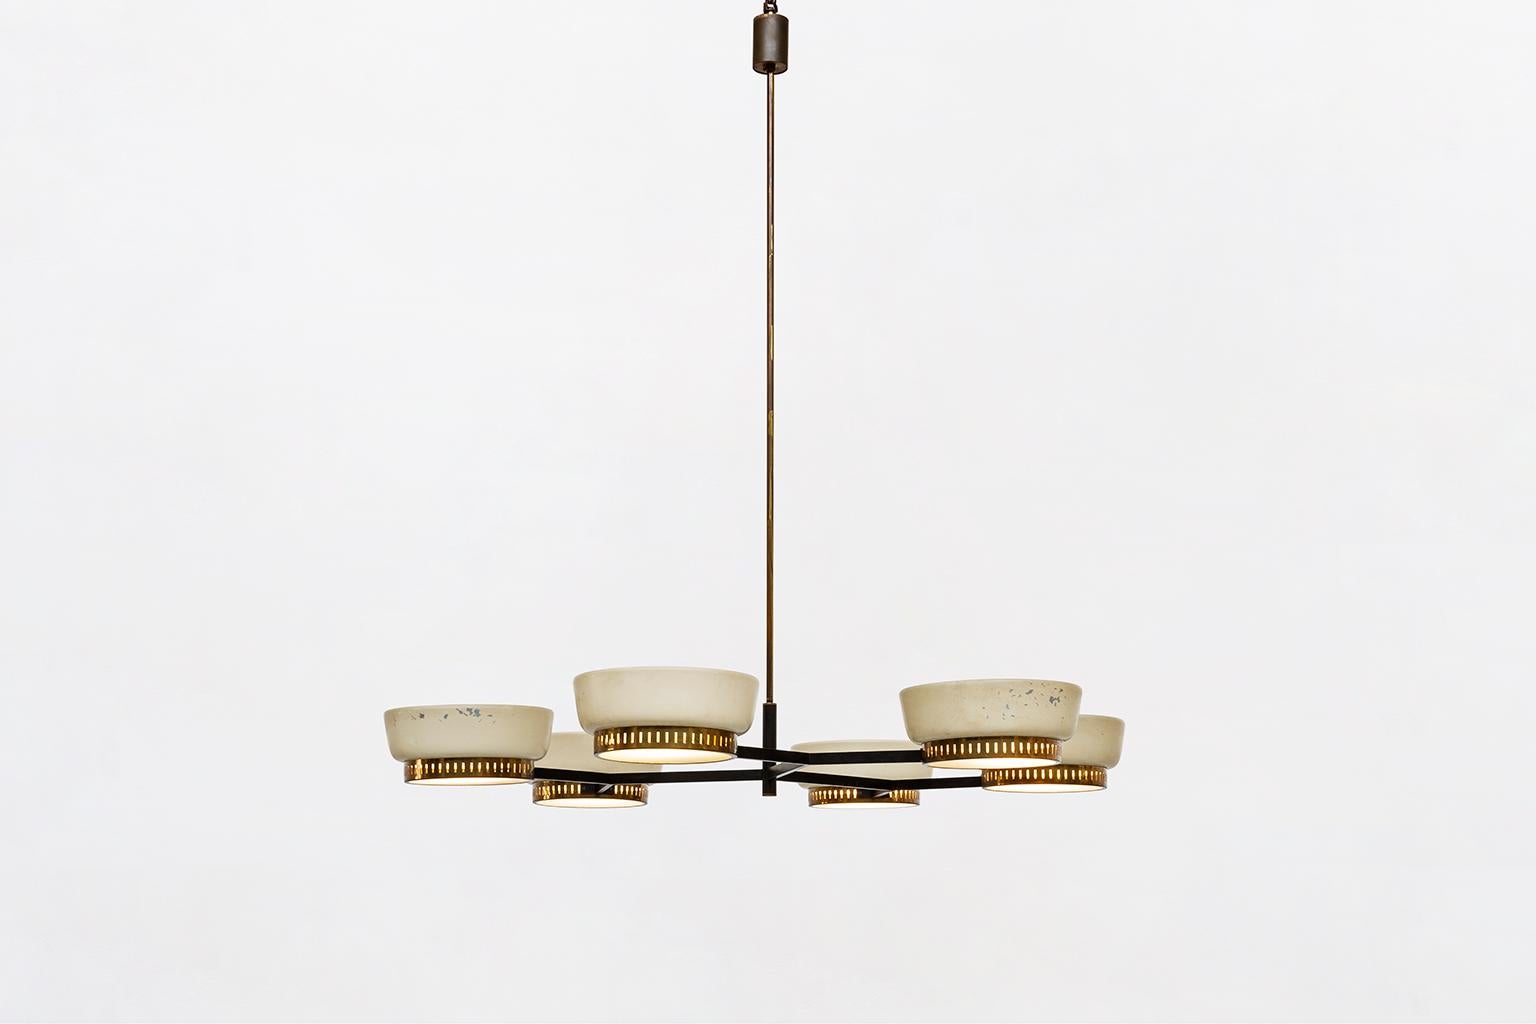 Italian six-lights, brass and metal, ceiling lamp Mod.1117/6 by Stilnovo, 1958
Extreme ceiling lamp Mod.1117/6 by Stilnovo from fifties. An absolute unfindable object, provide of six lights staying on a metal and brass structure, precisely a brass